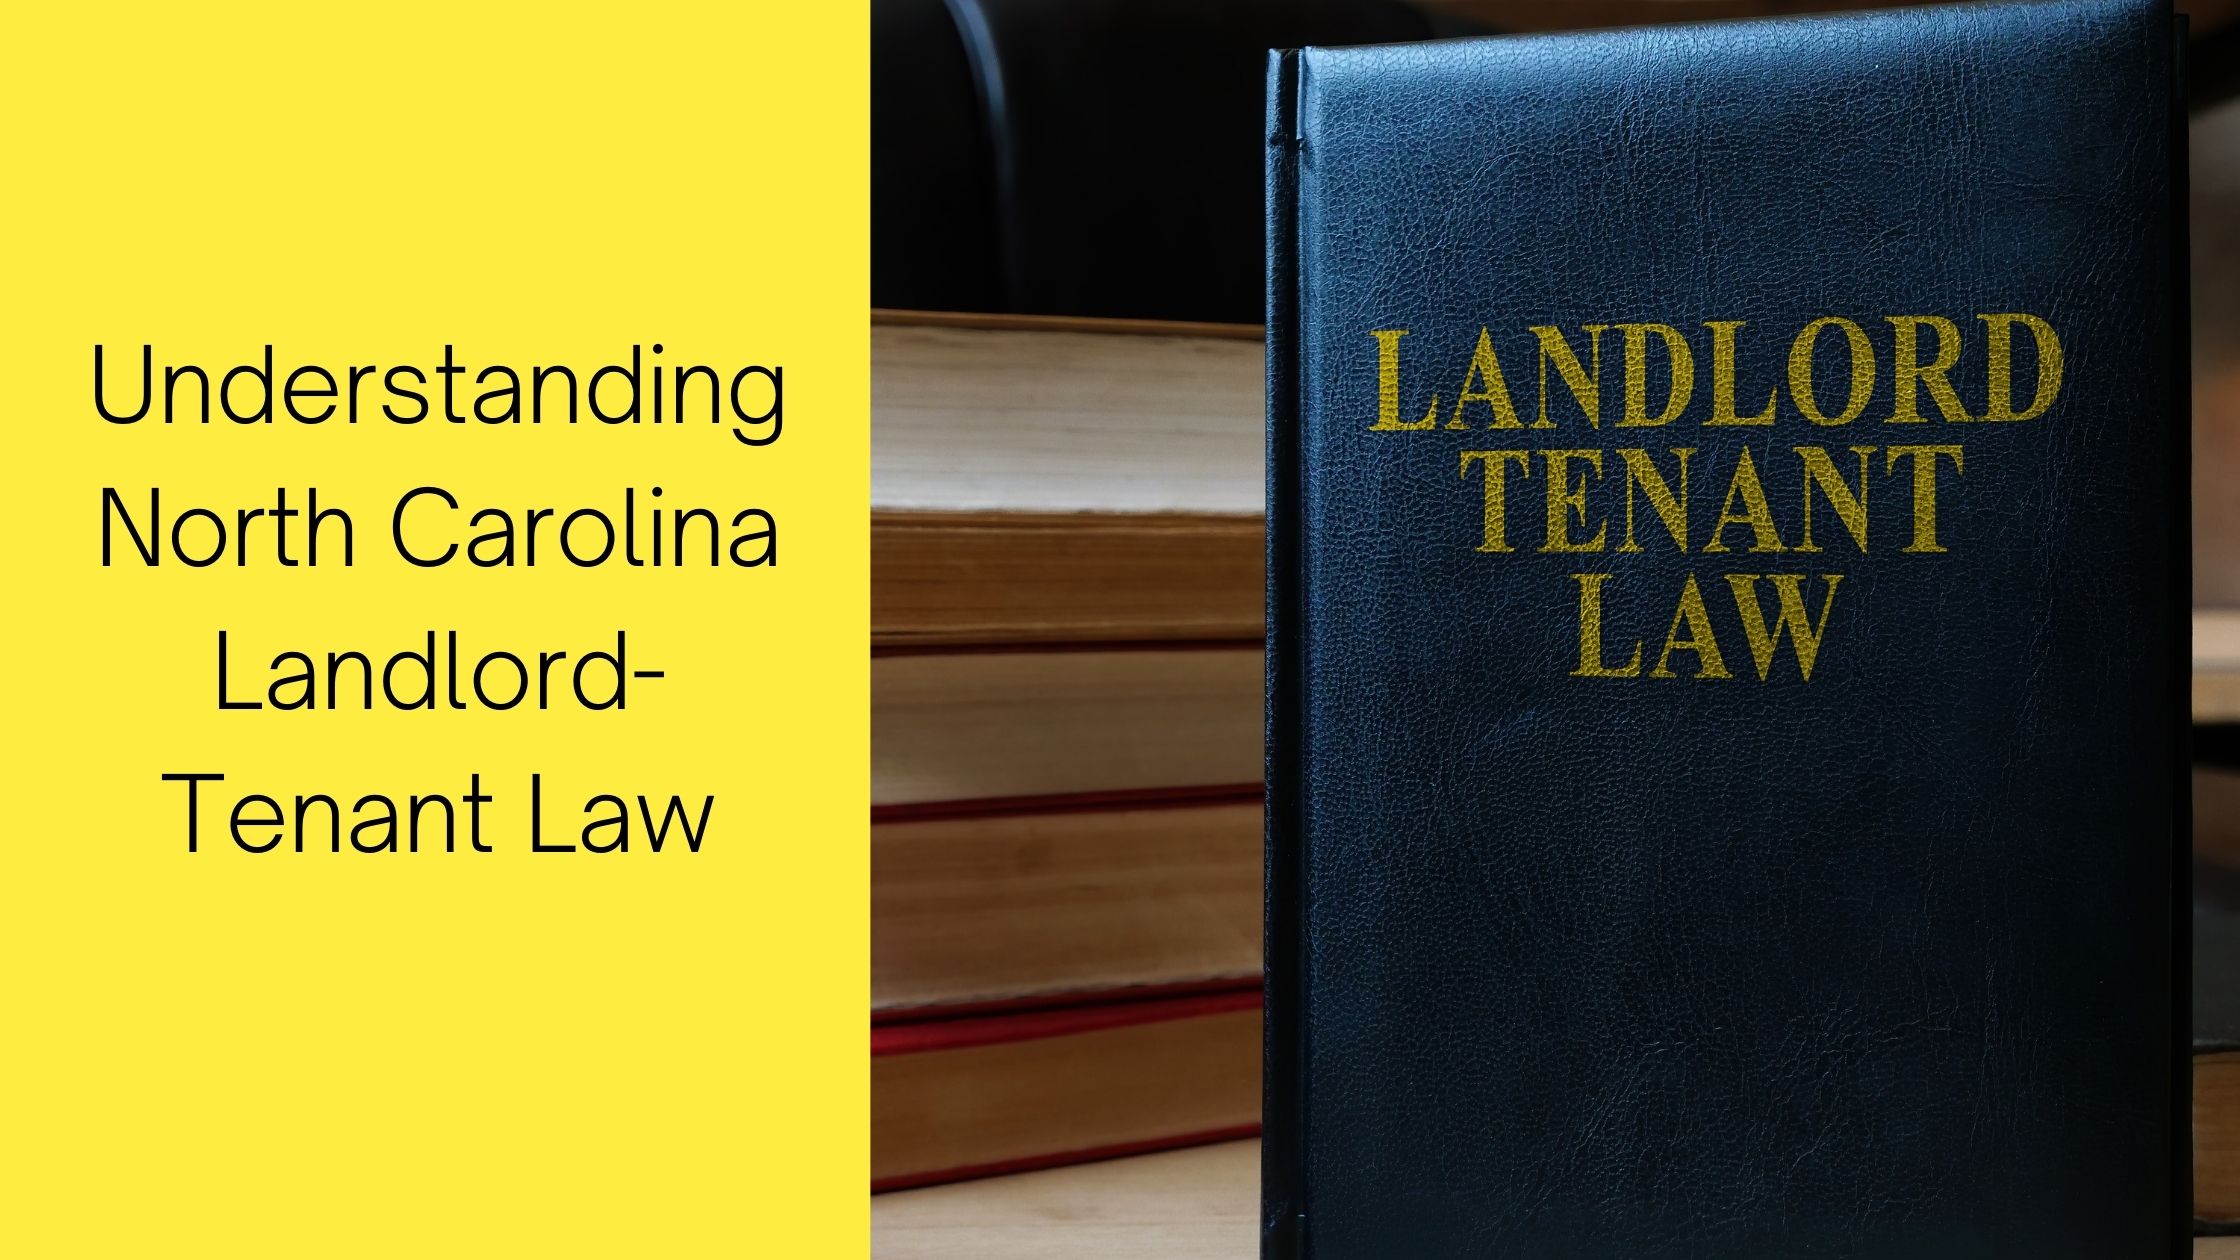 Overview of Landlord-Tenant Laws in North Carolina